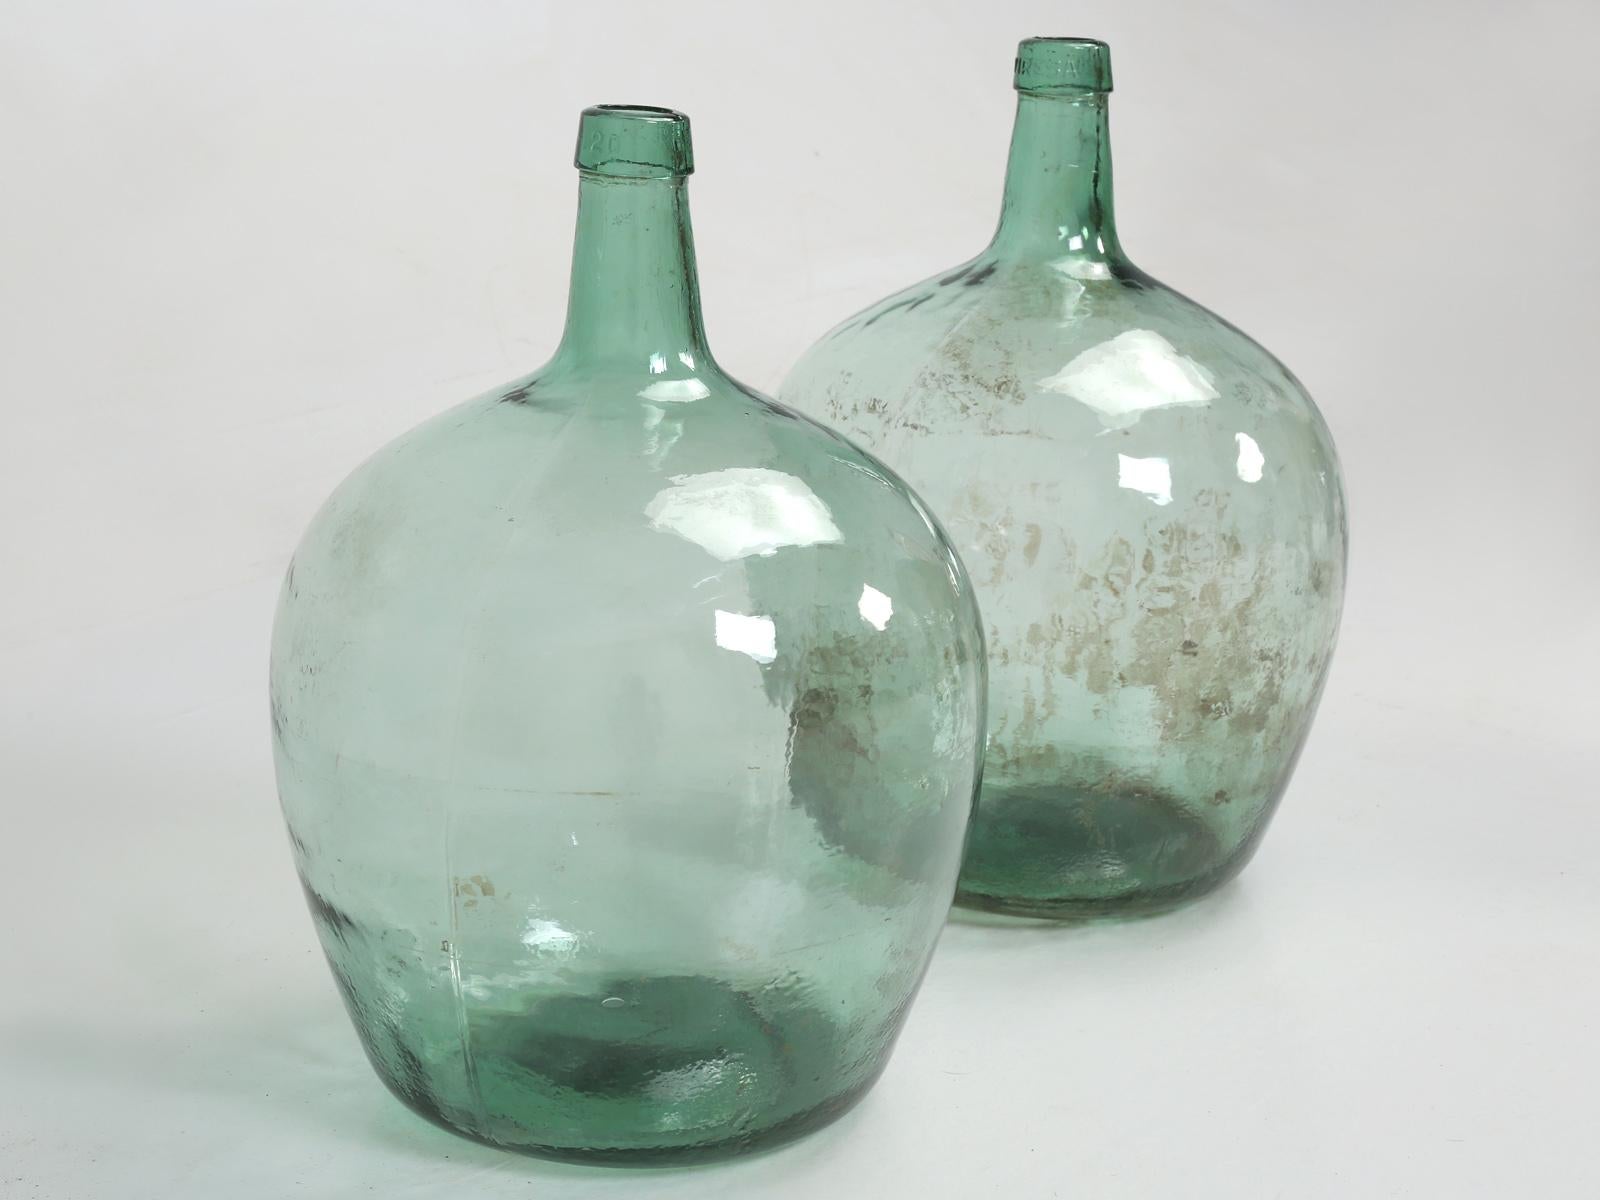 Great pair of antique French demijohn's, that could be made into a great pair of lamps? Carboy or demijohn or jimmyjohn, all refer to the same glass container, which will have a large body and a narrow neck. Demijohn's are believed to have